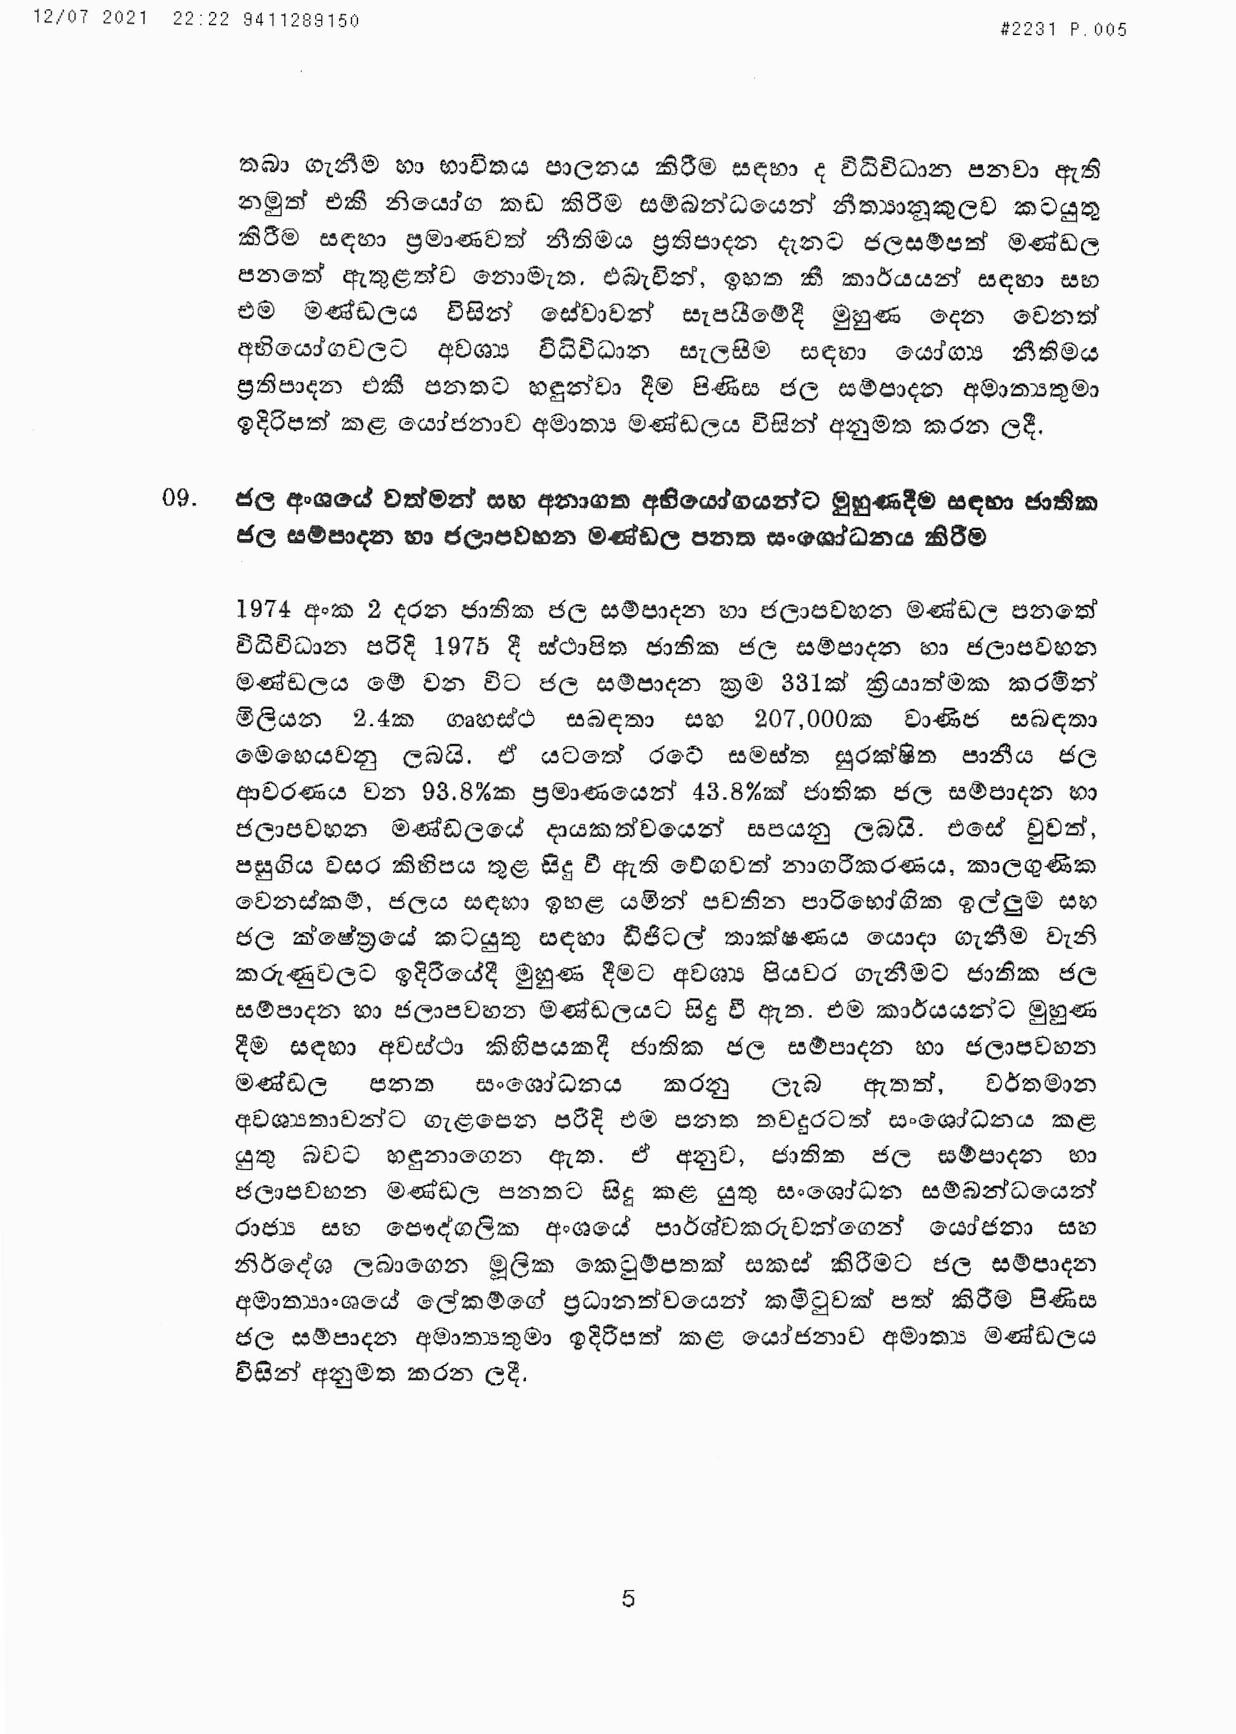 Cabinet Decision on 12.07.2021 page 005